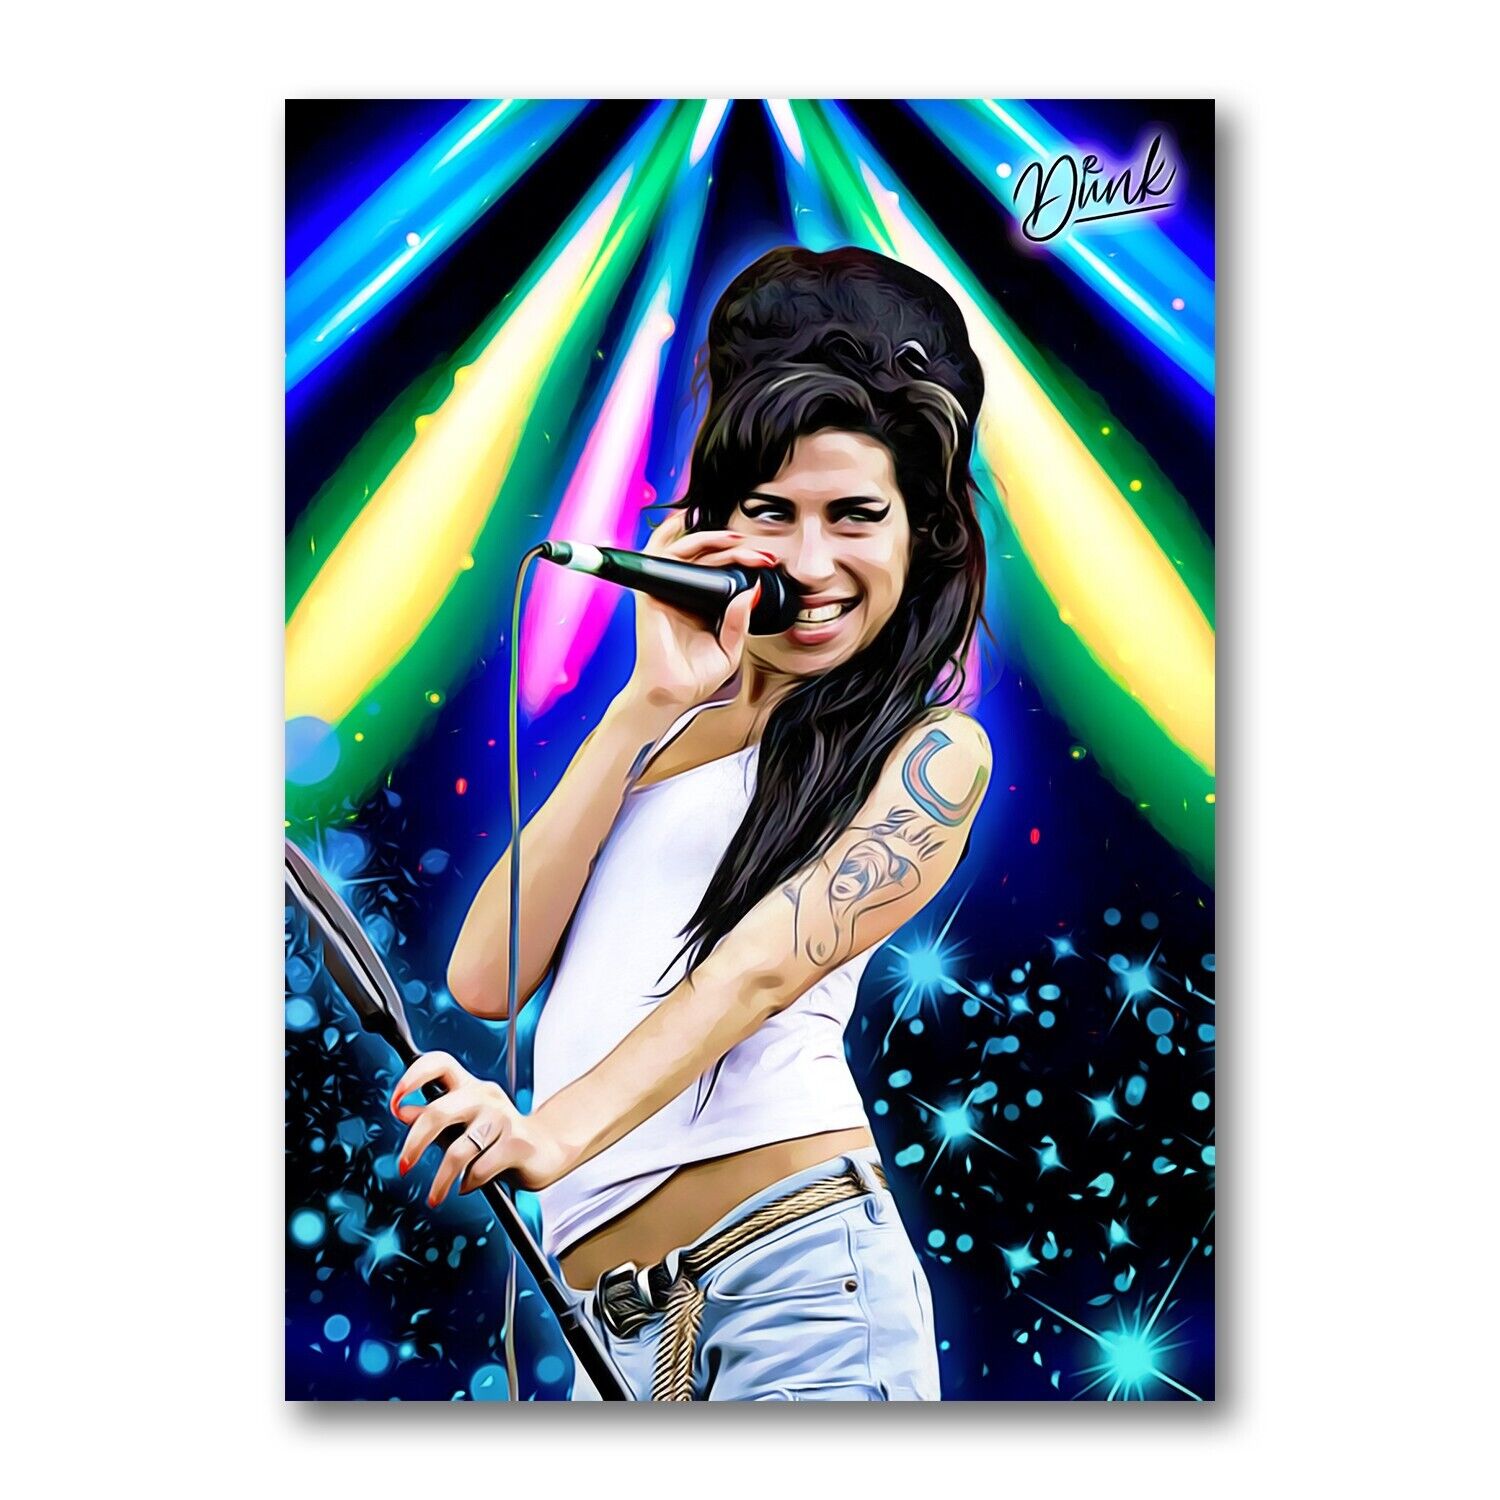 Amy Winehouse VIP Headliner Sketch Card Limited 16/20 Dr. Dunk Signed